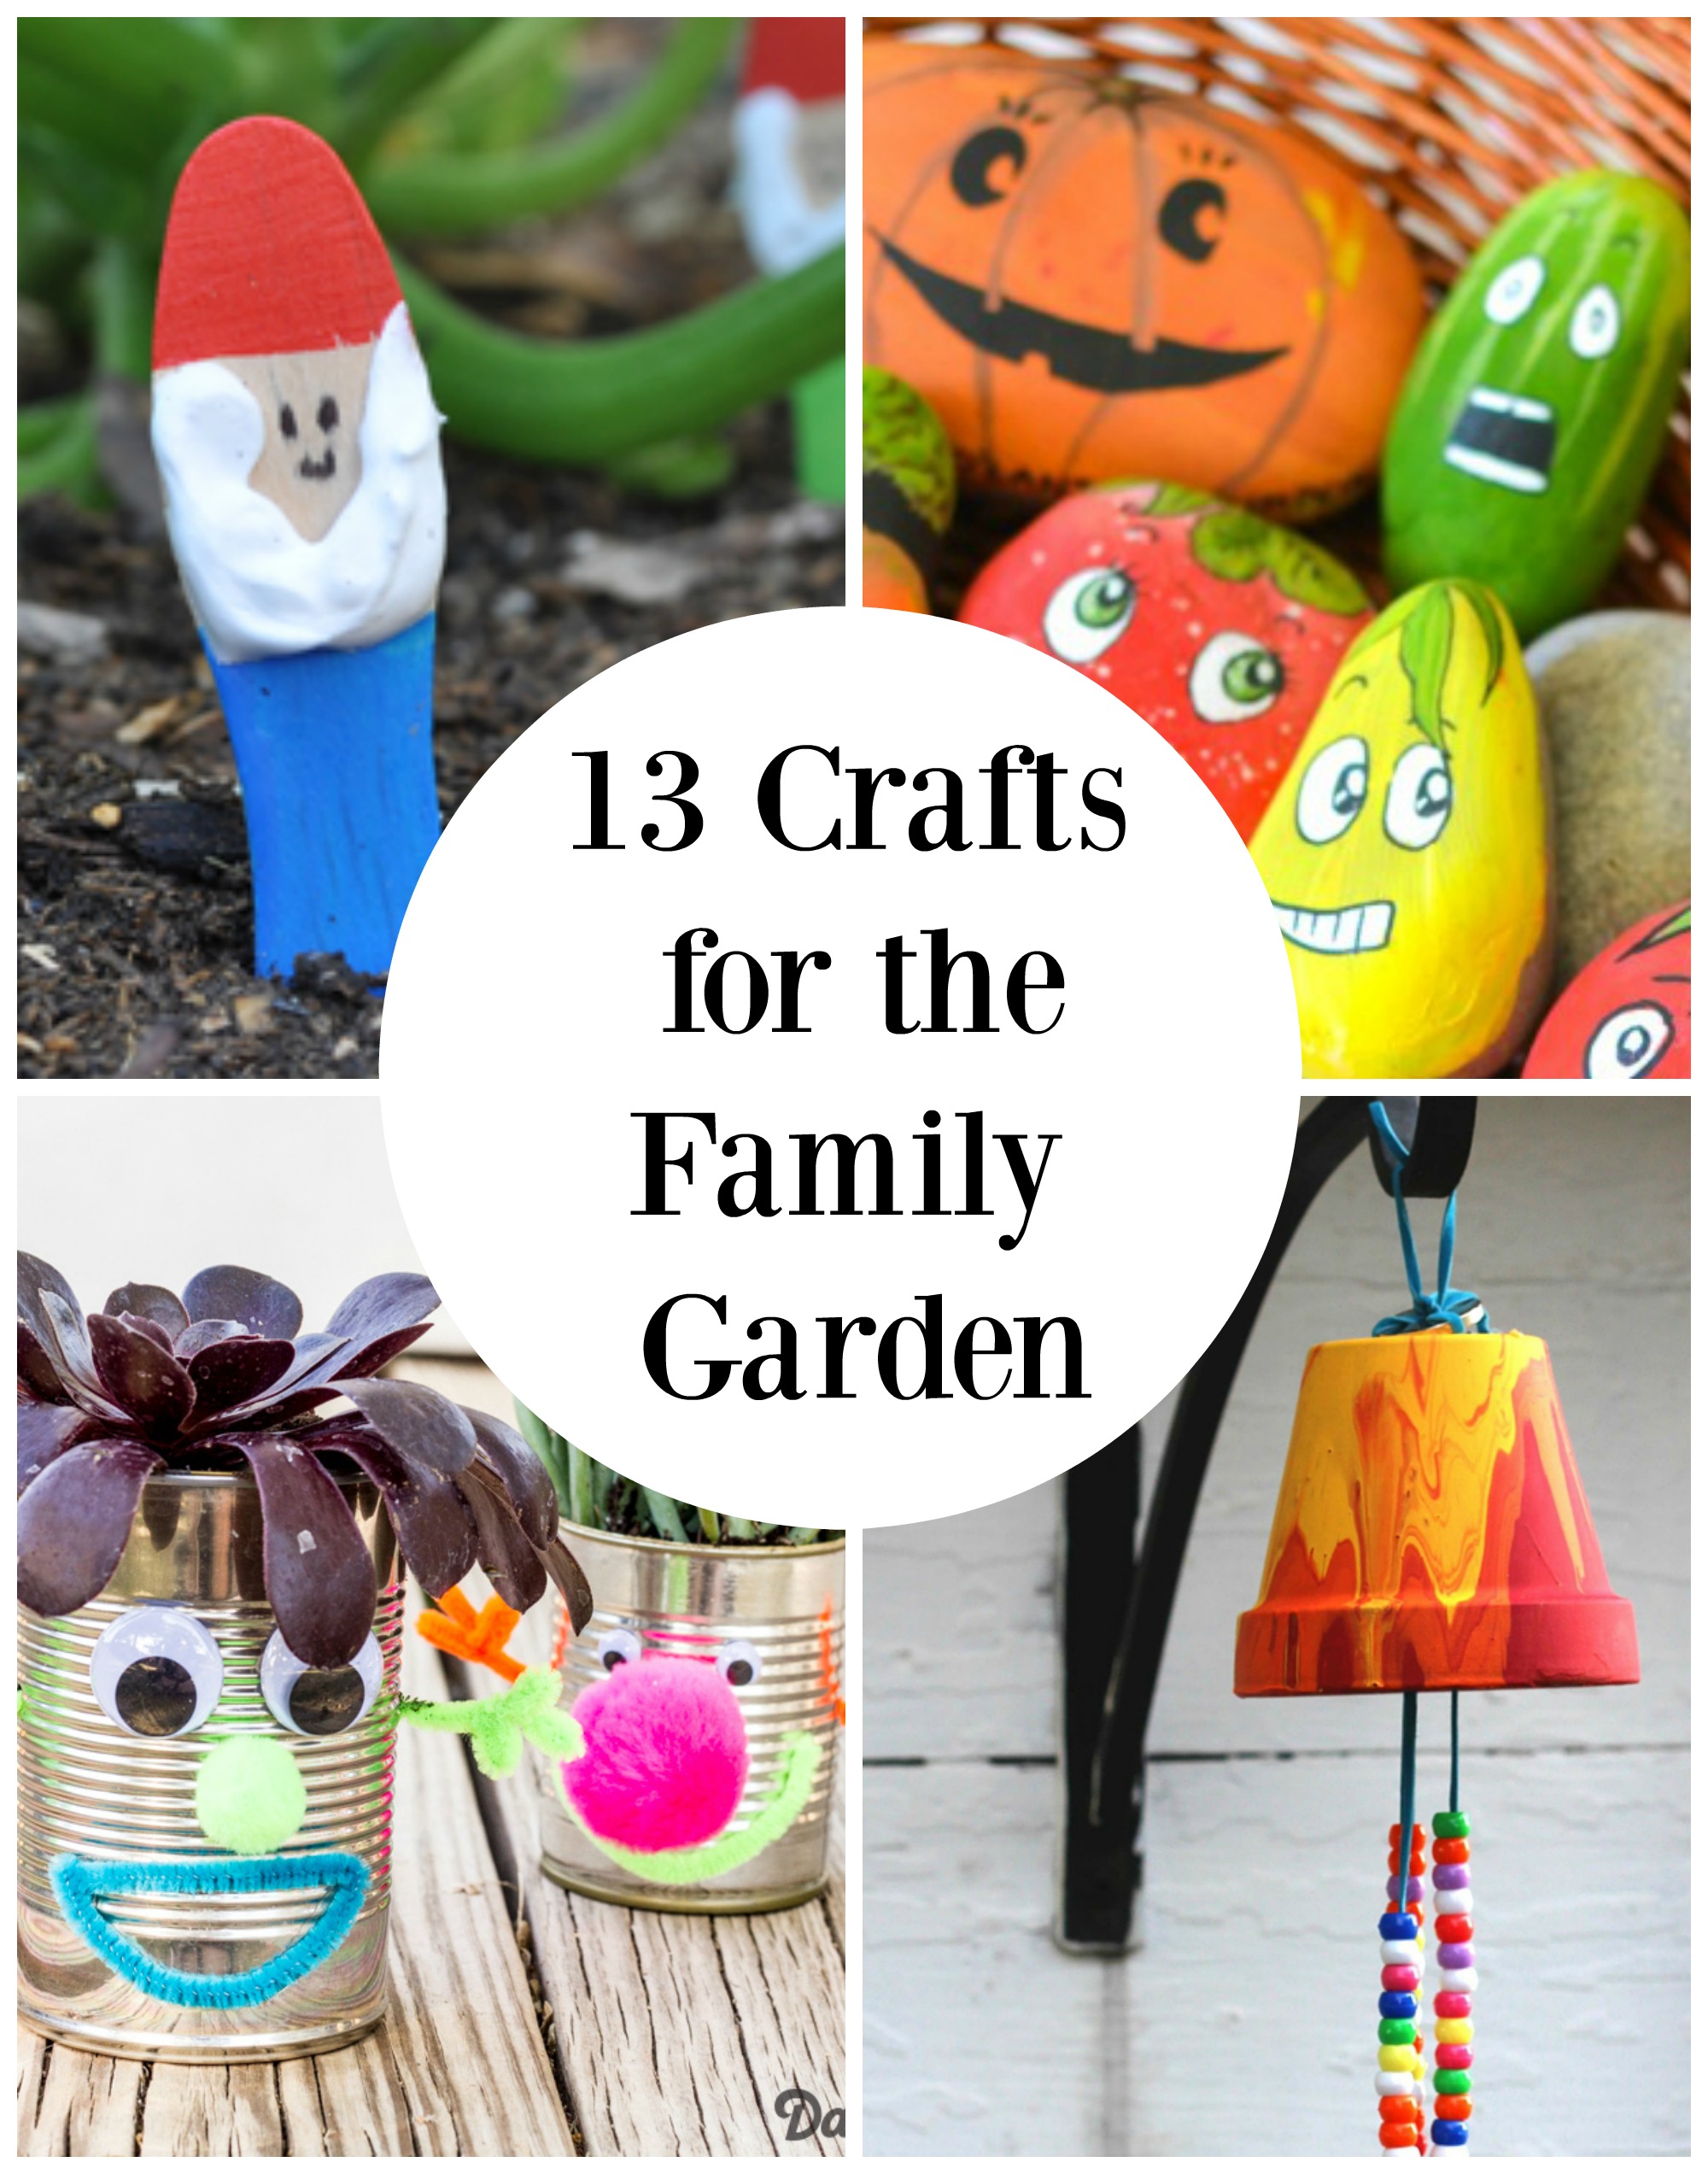 13 Family Garden Crafts You'll Love to Make - Make and Takes